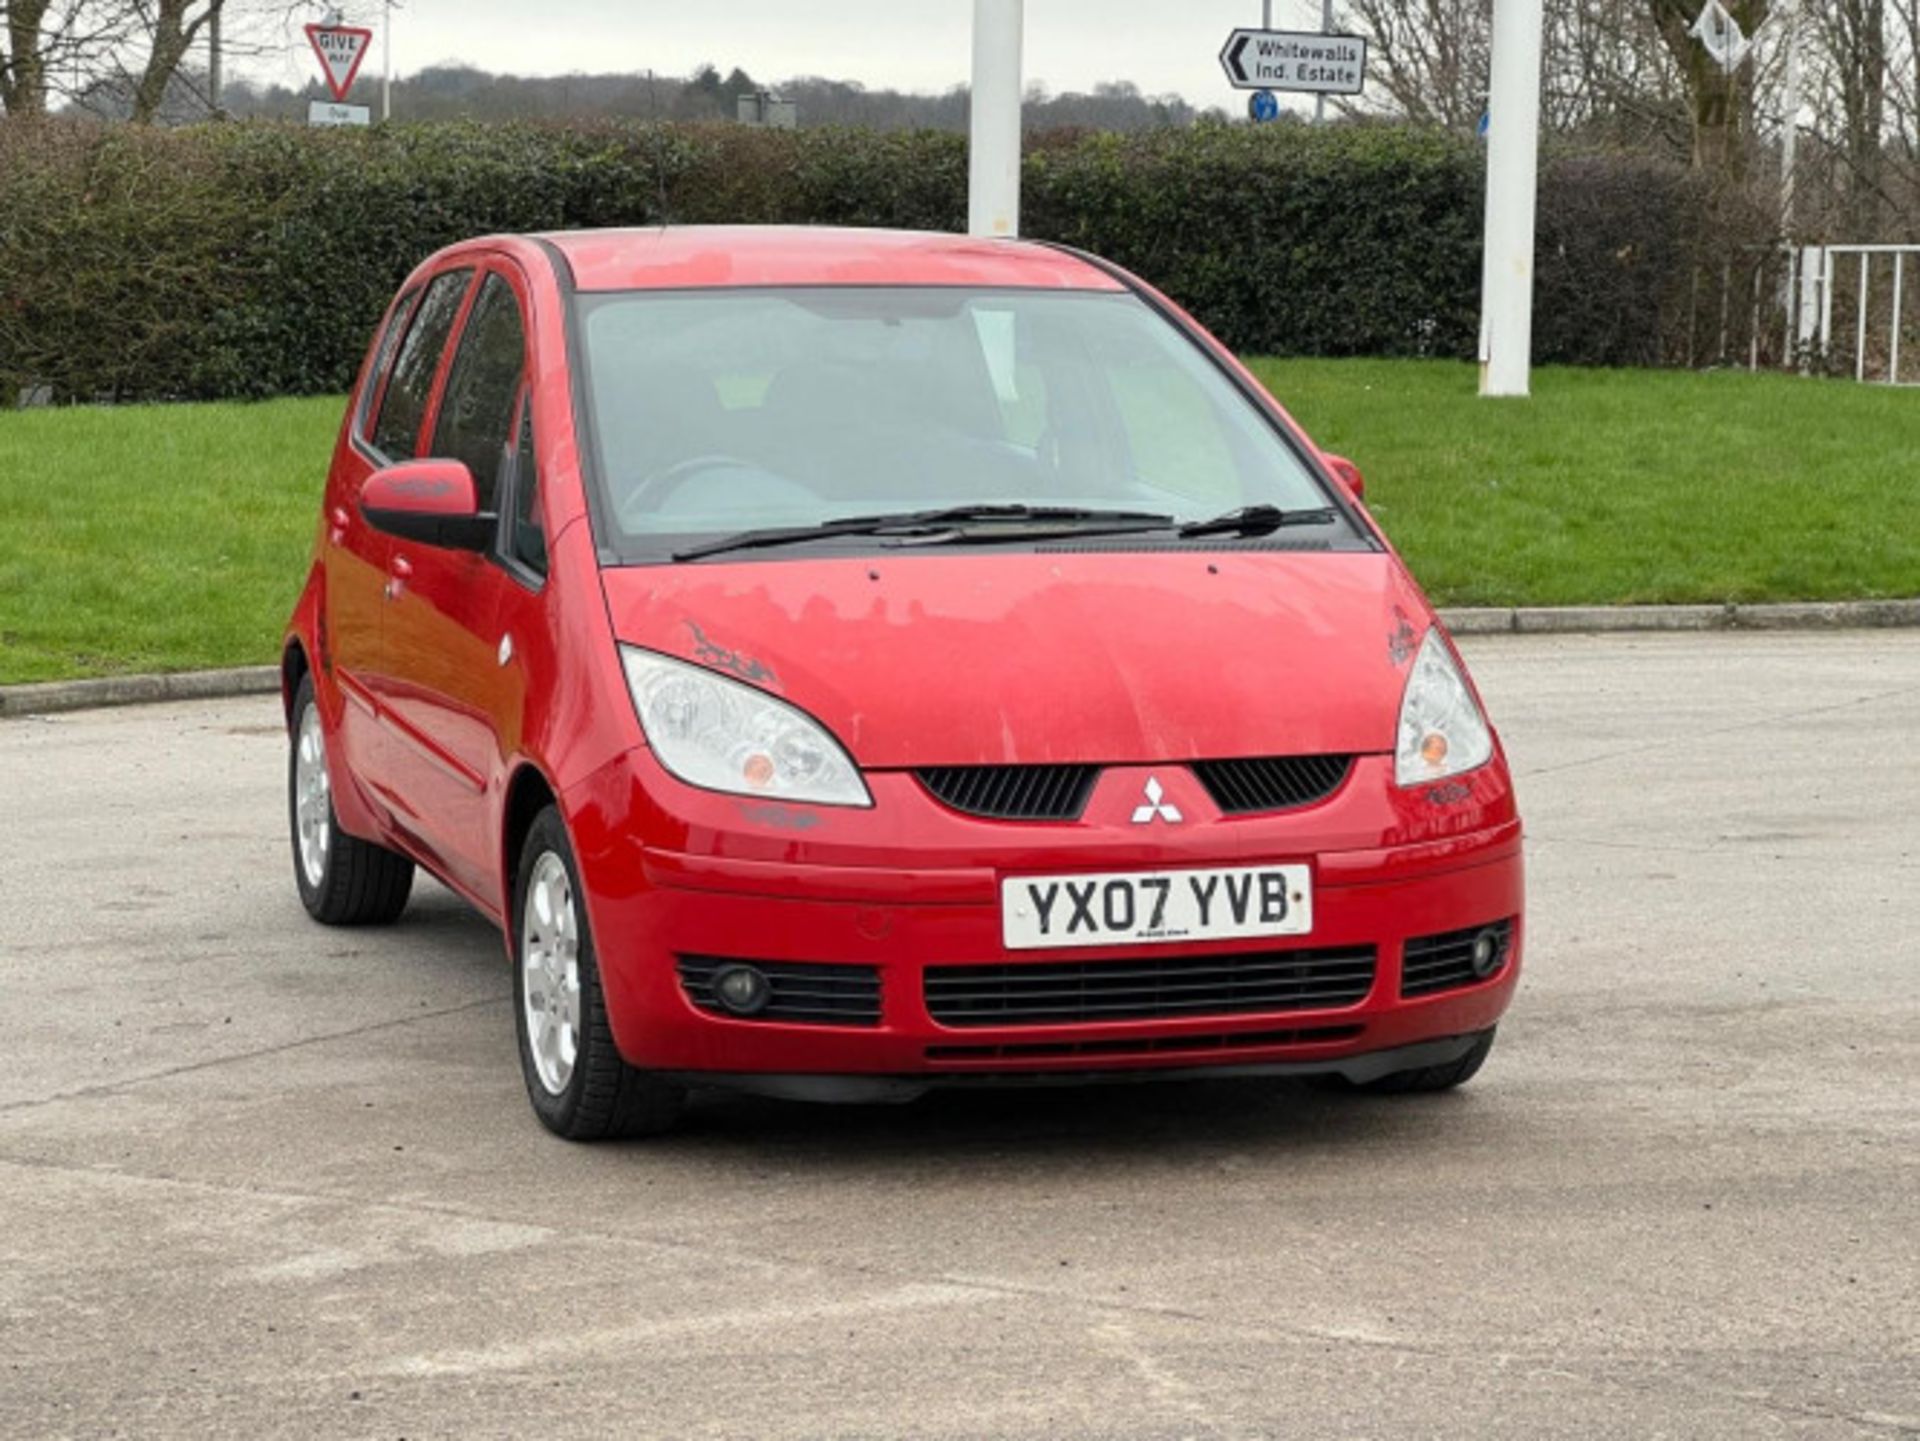 2007 MITSUBISHI COLT 1.5 DI-D DIESEL AUTOMATIC >>--NO VAT ON HAMMER--<< - Image 124 of 127